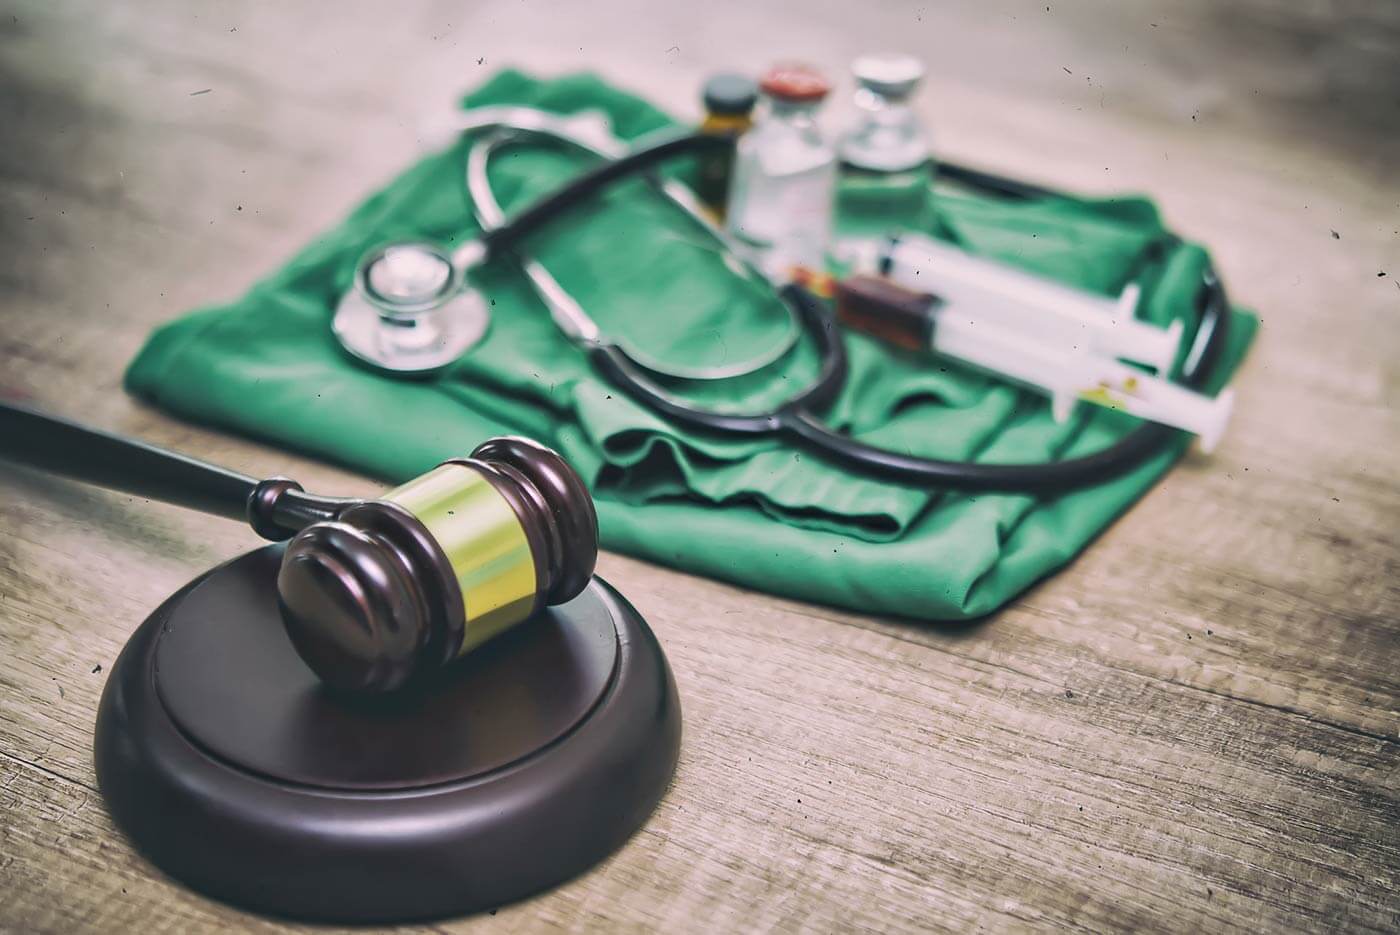 Folded surgical scrubs, stethoscope, medicine vials,  and a judge's gavel on a distressed wooden surface.